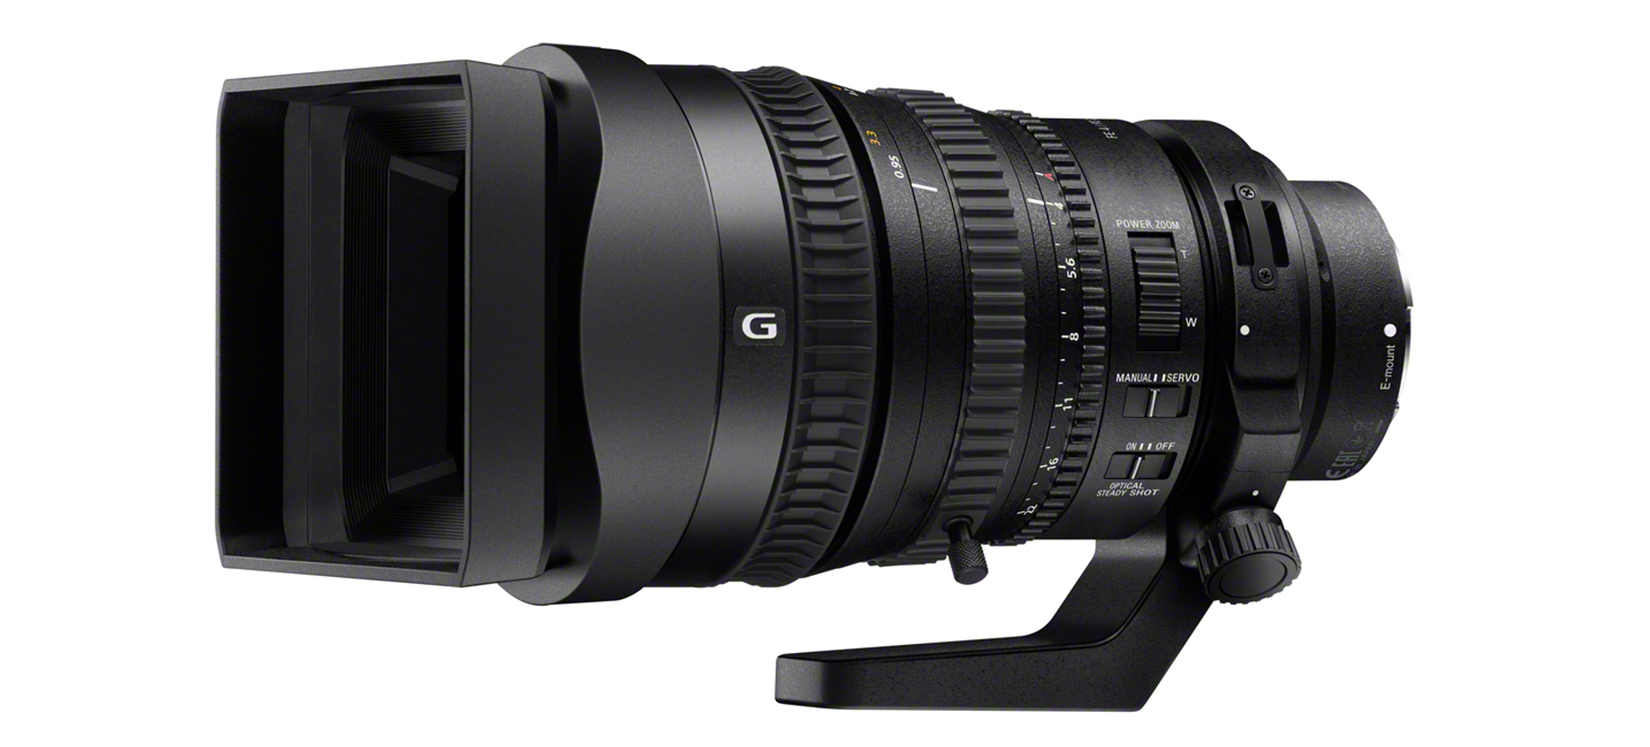 Sony Releases Burly E-Mount Lens With Serious Video Chops For Your A7